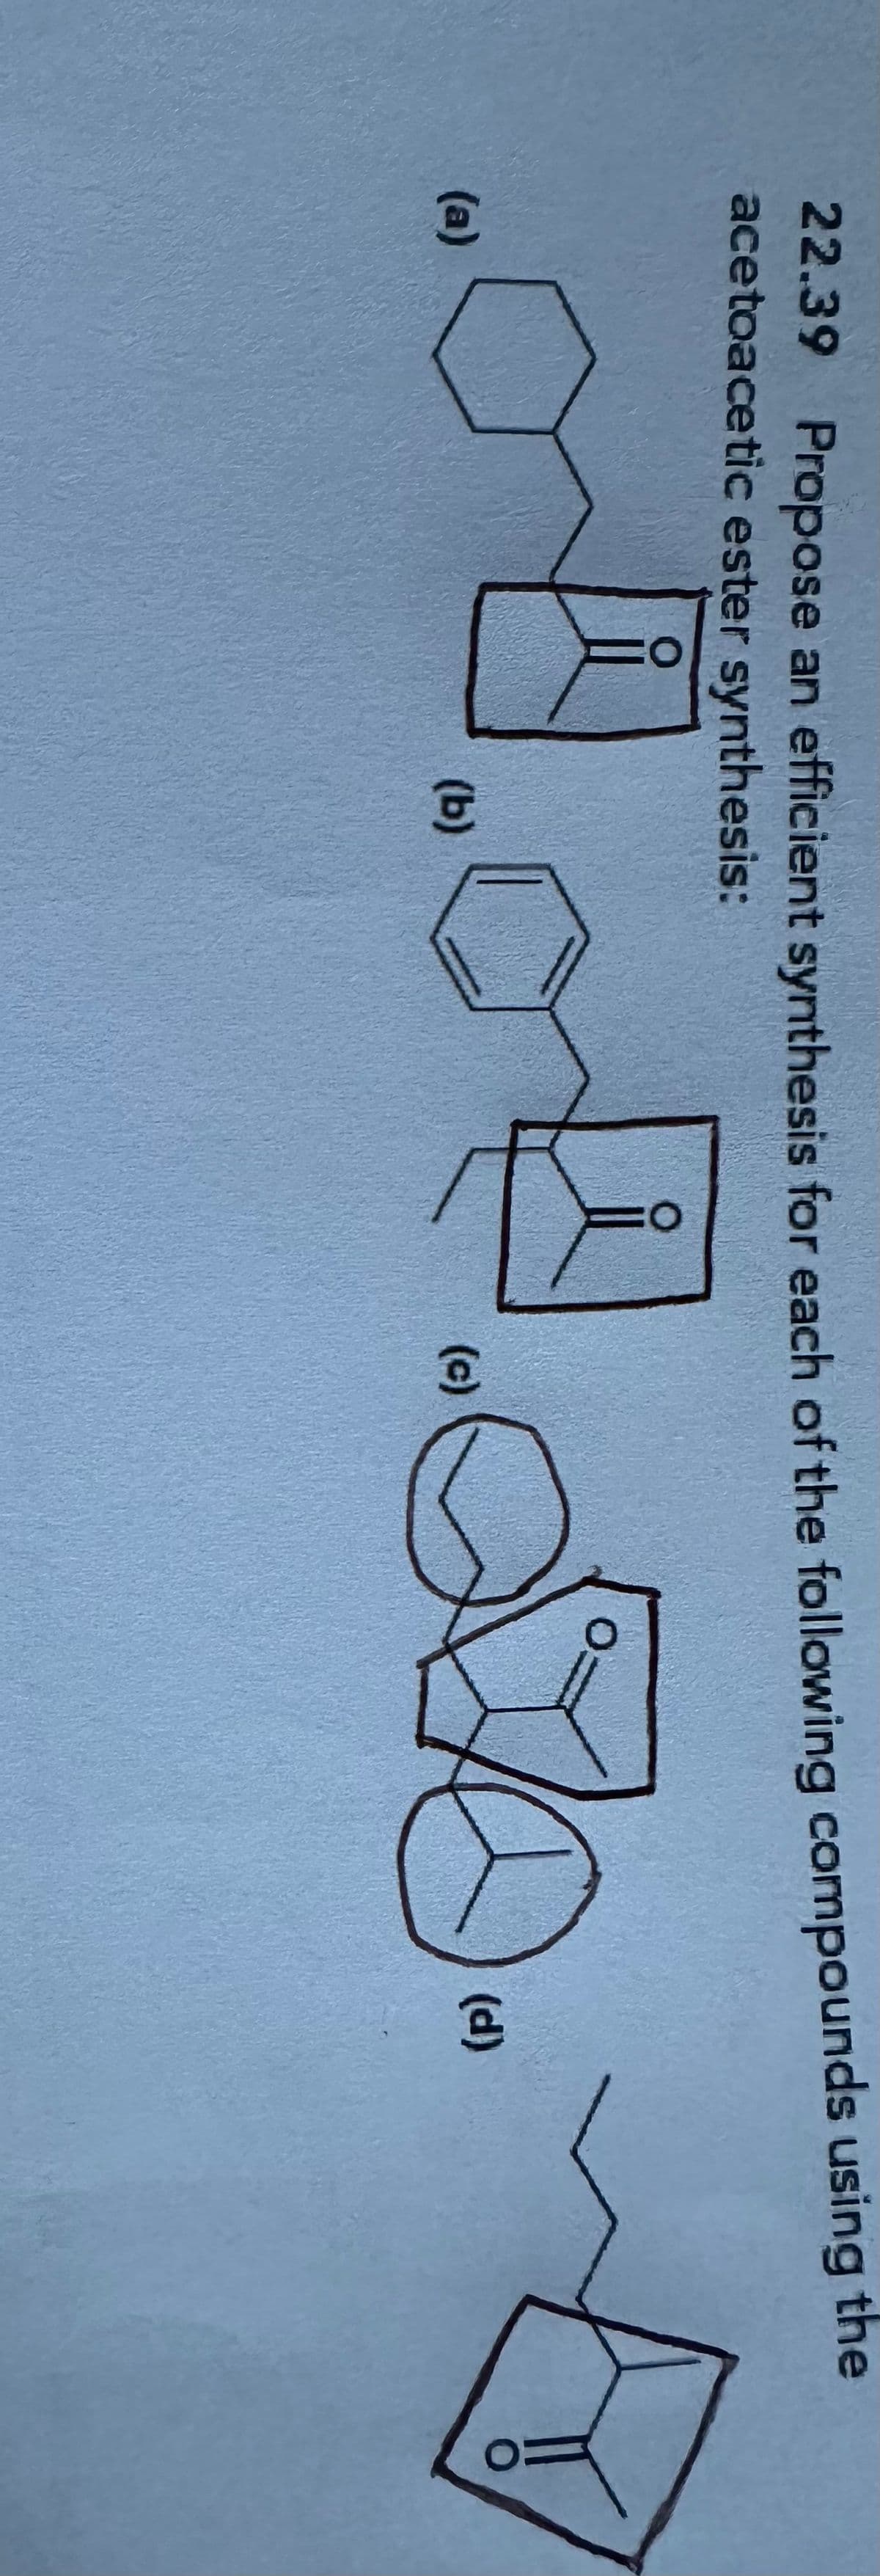 22.39 Propose an efficient synthesis for each of the following compounds using the
acetoacetic ester synthesis:
(a)
(c)
(b)
0:
(d)